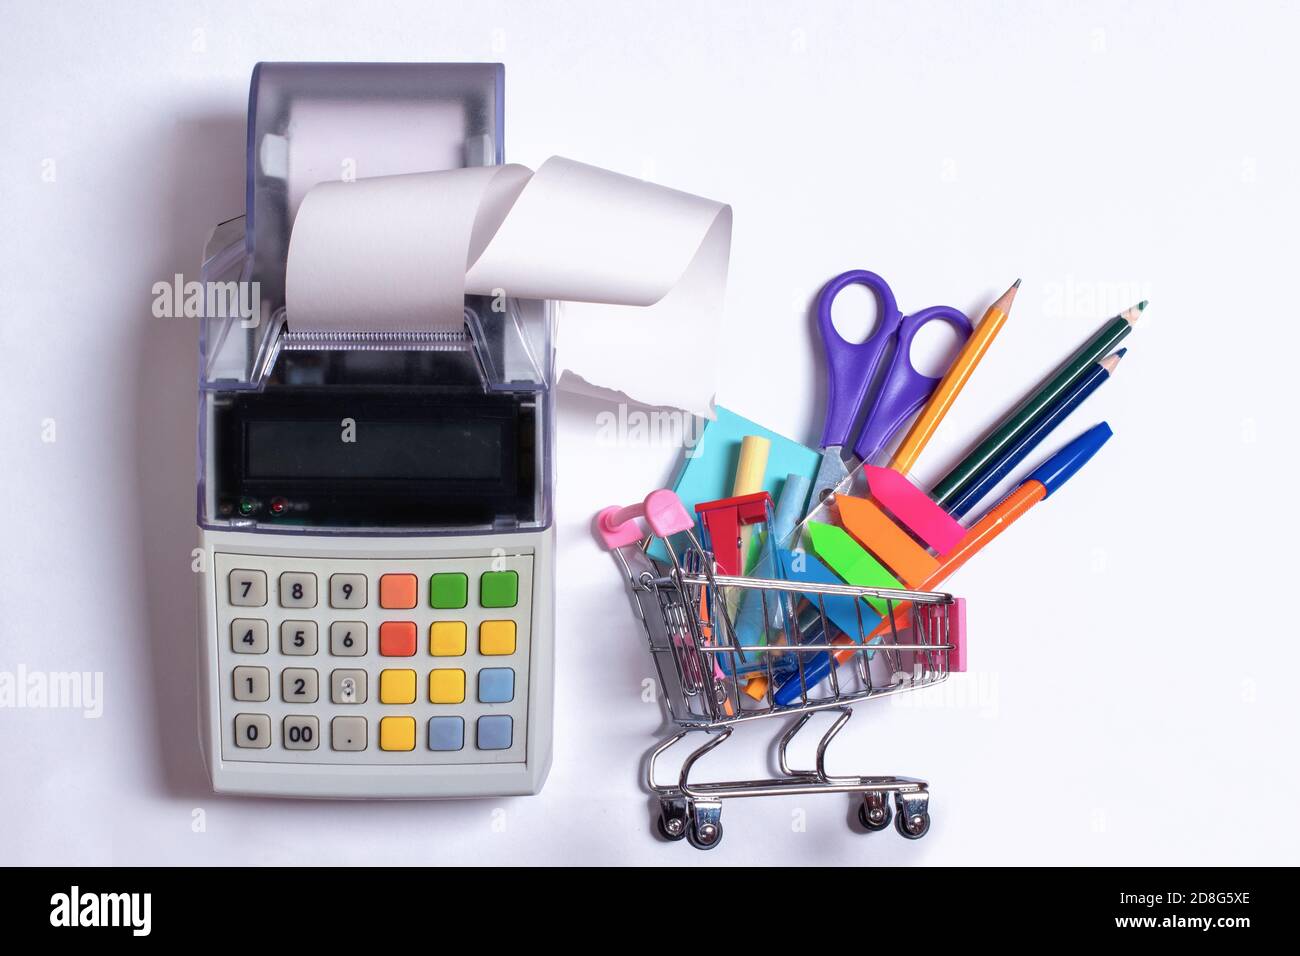 Top view photo of a shopping trolley with colorful stationery and a cash register with a receipt tape Stock Photo